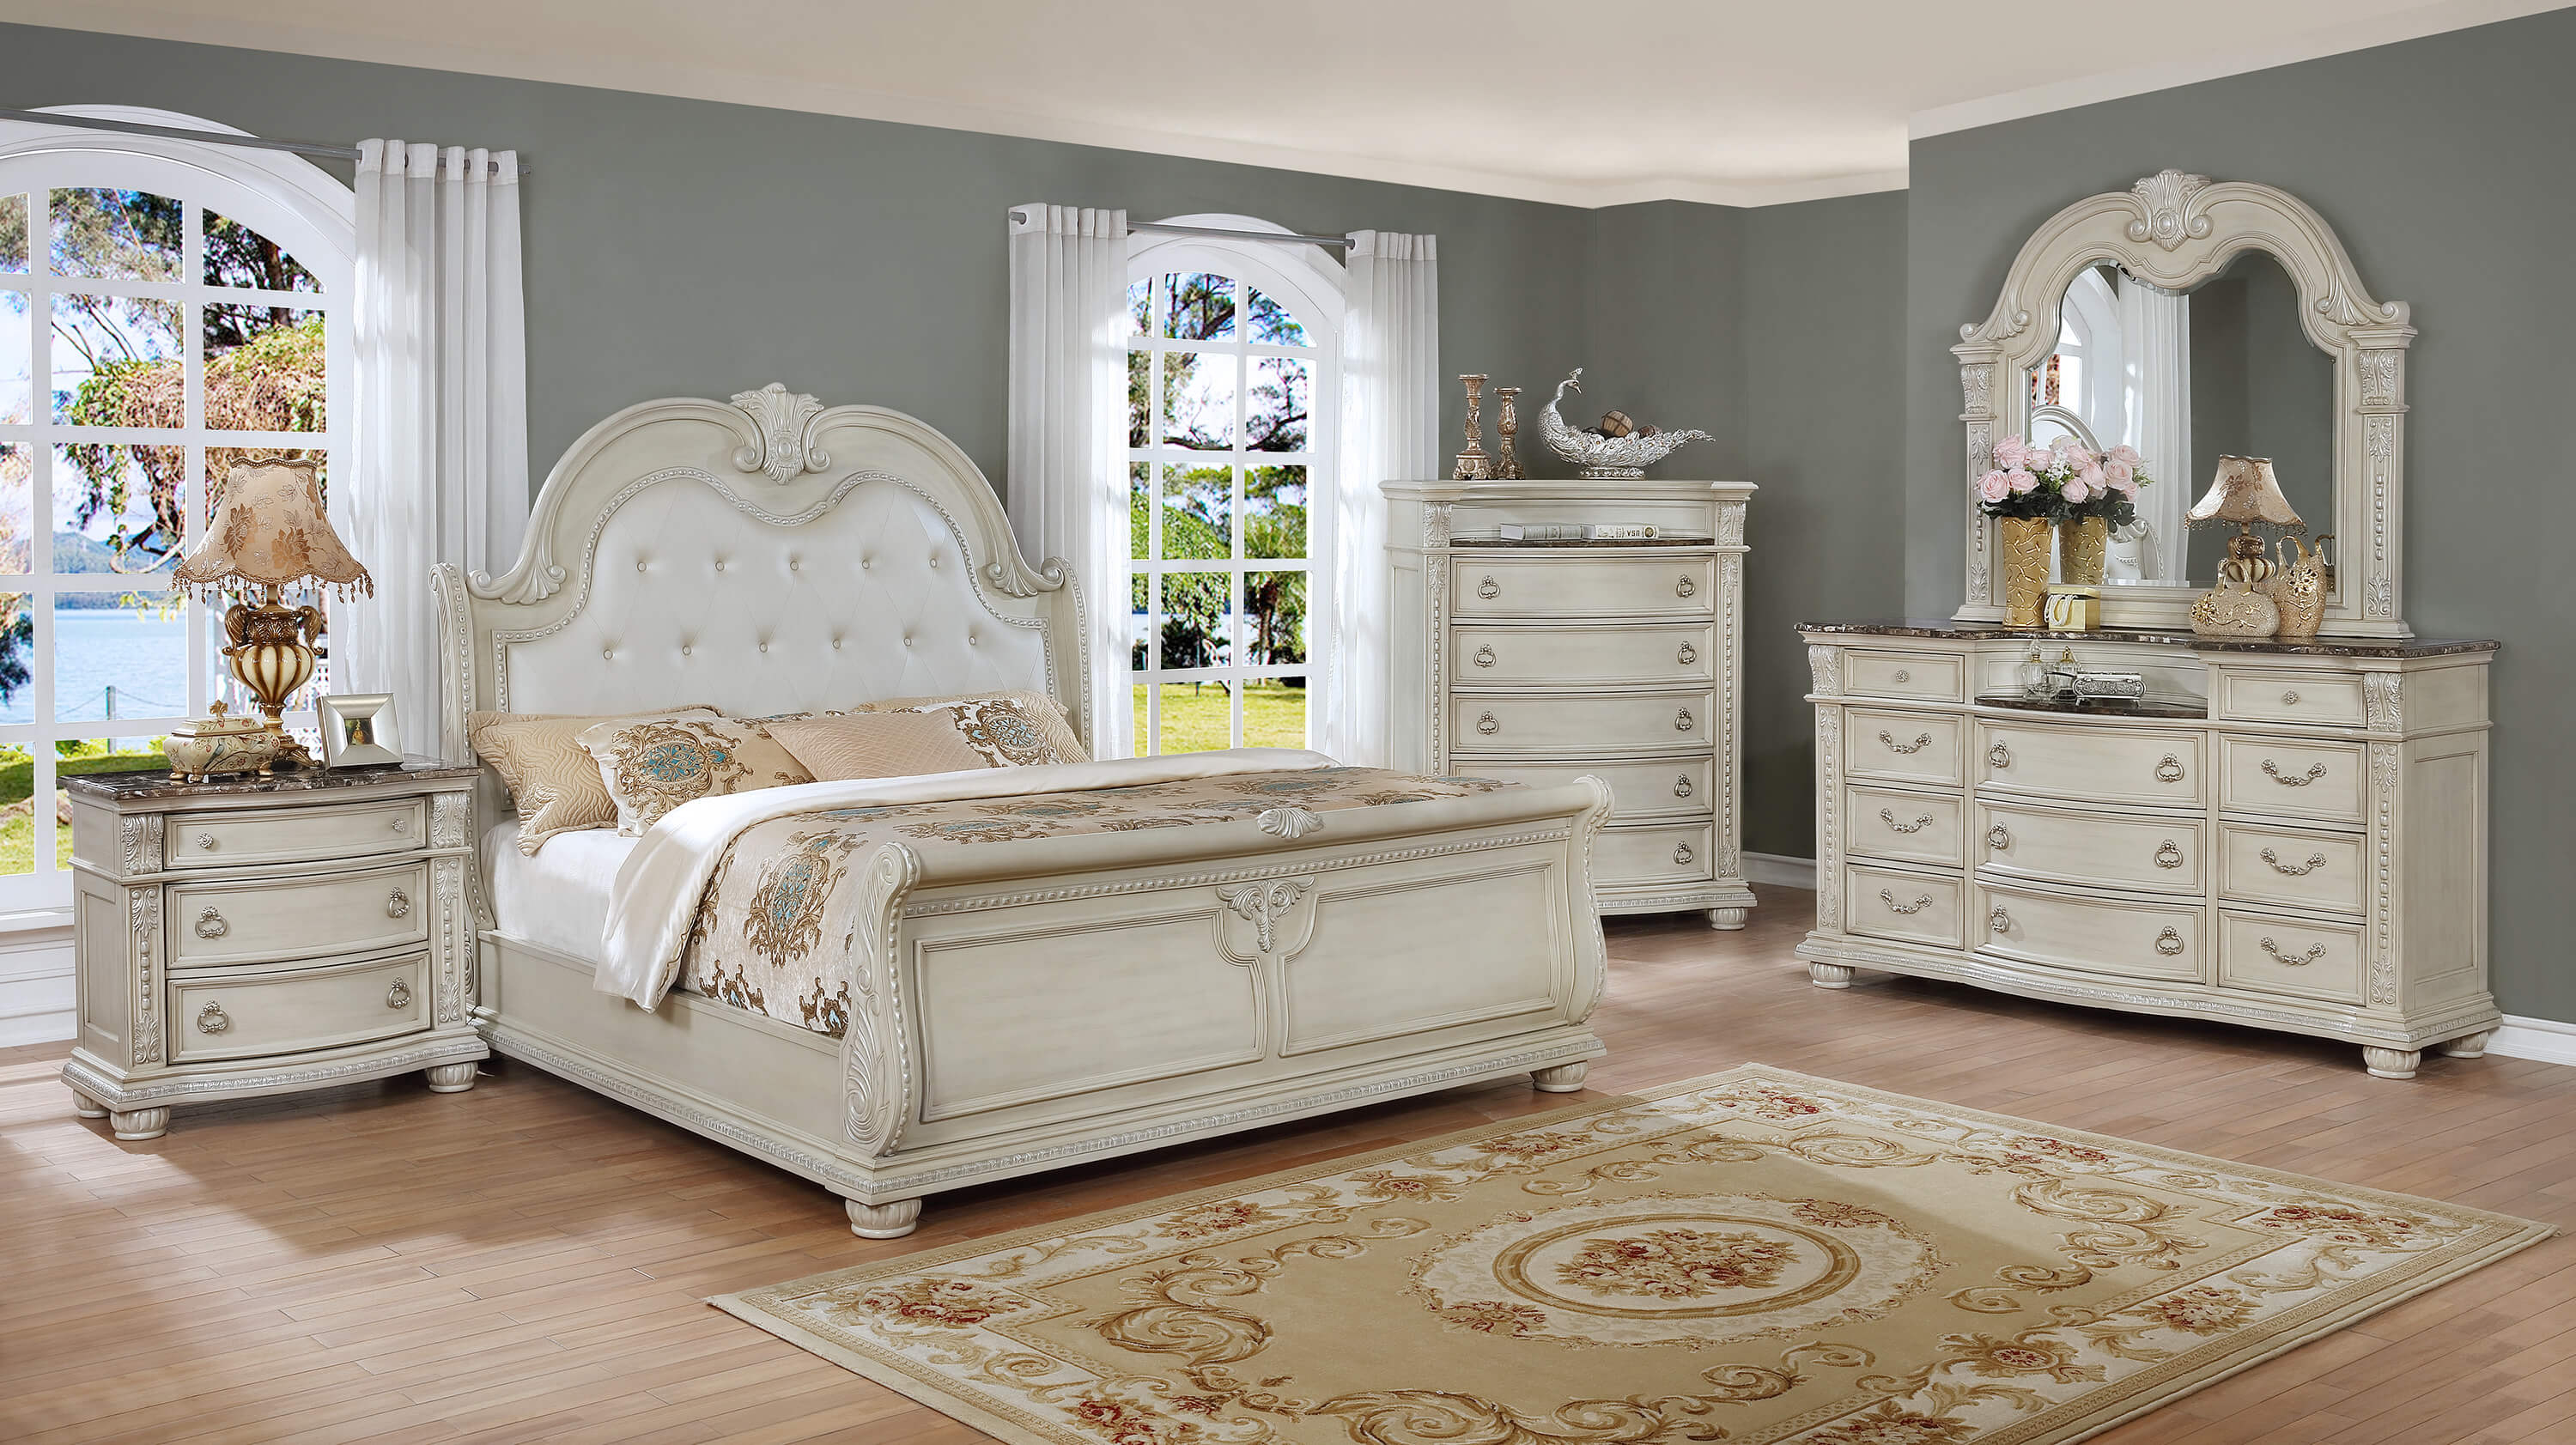 B1630 Stanley Antique White Marble Bedroom Set Crown Mark throughout dimensions 3000 X 1683